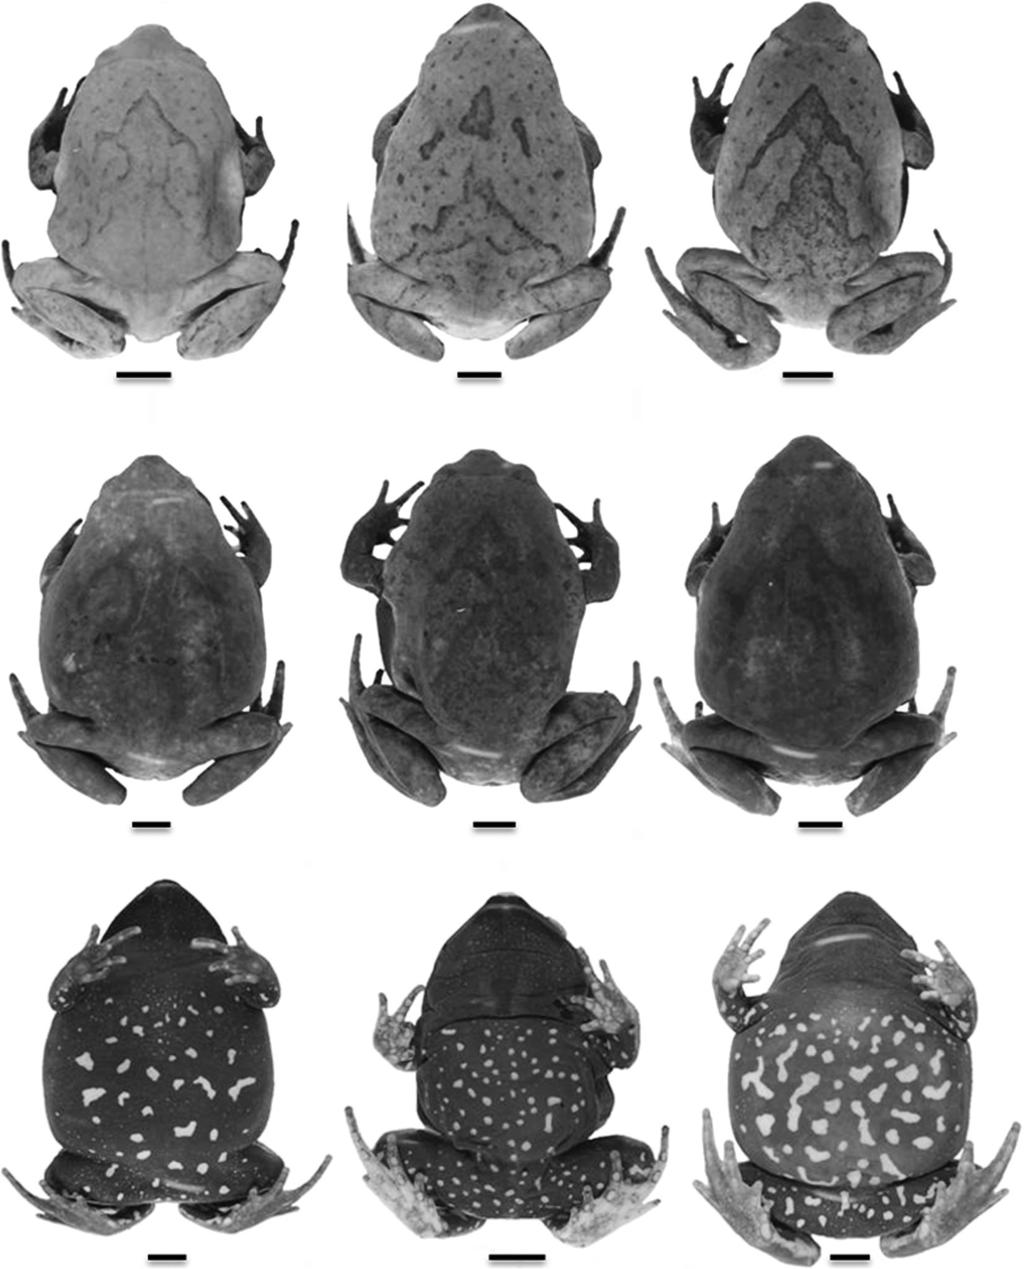 Redescription and variation of Hyophryne histrio Carvalho, 1954 471 Figure 3. Variation of the dorsal and ventral pattern of Hyophryne histrio.